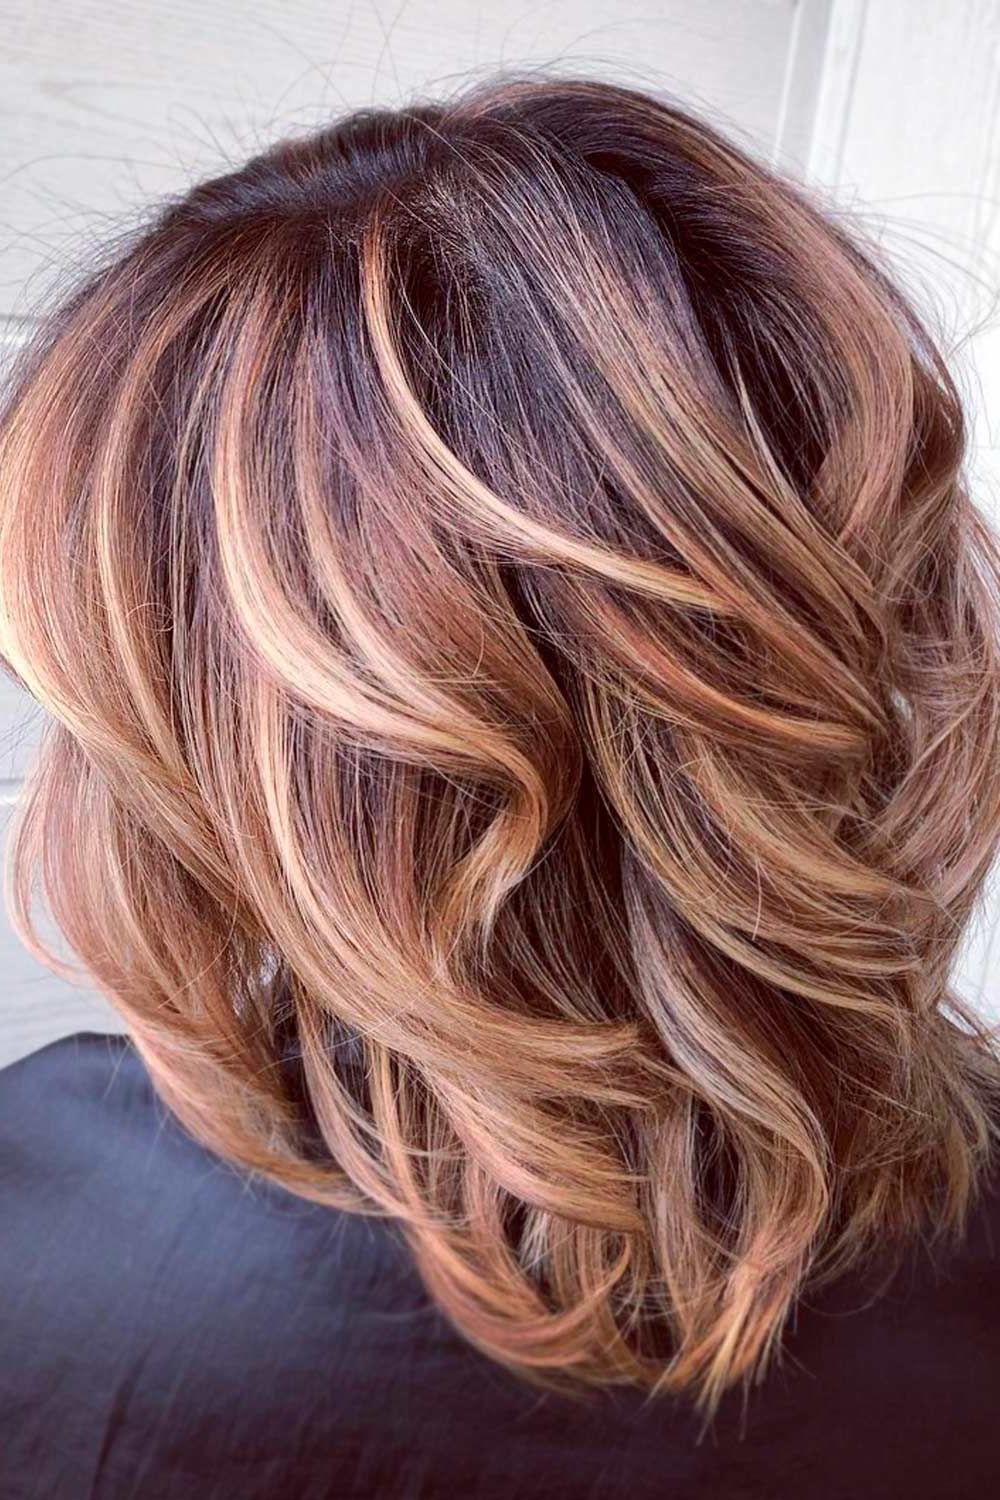 Untraditional Lob Haircut Ideas To Give A Try | Lovehairstyles Pertaining To Best And Newest Wavy Chocolate Lob Haircuts (View 6 of 25)